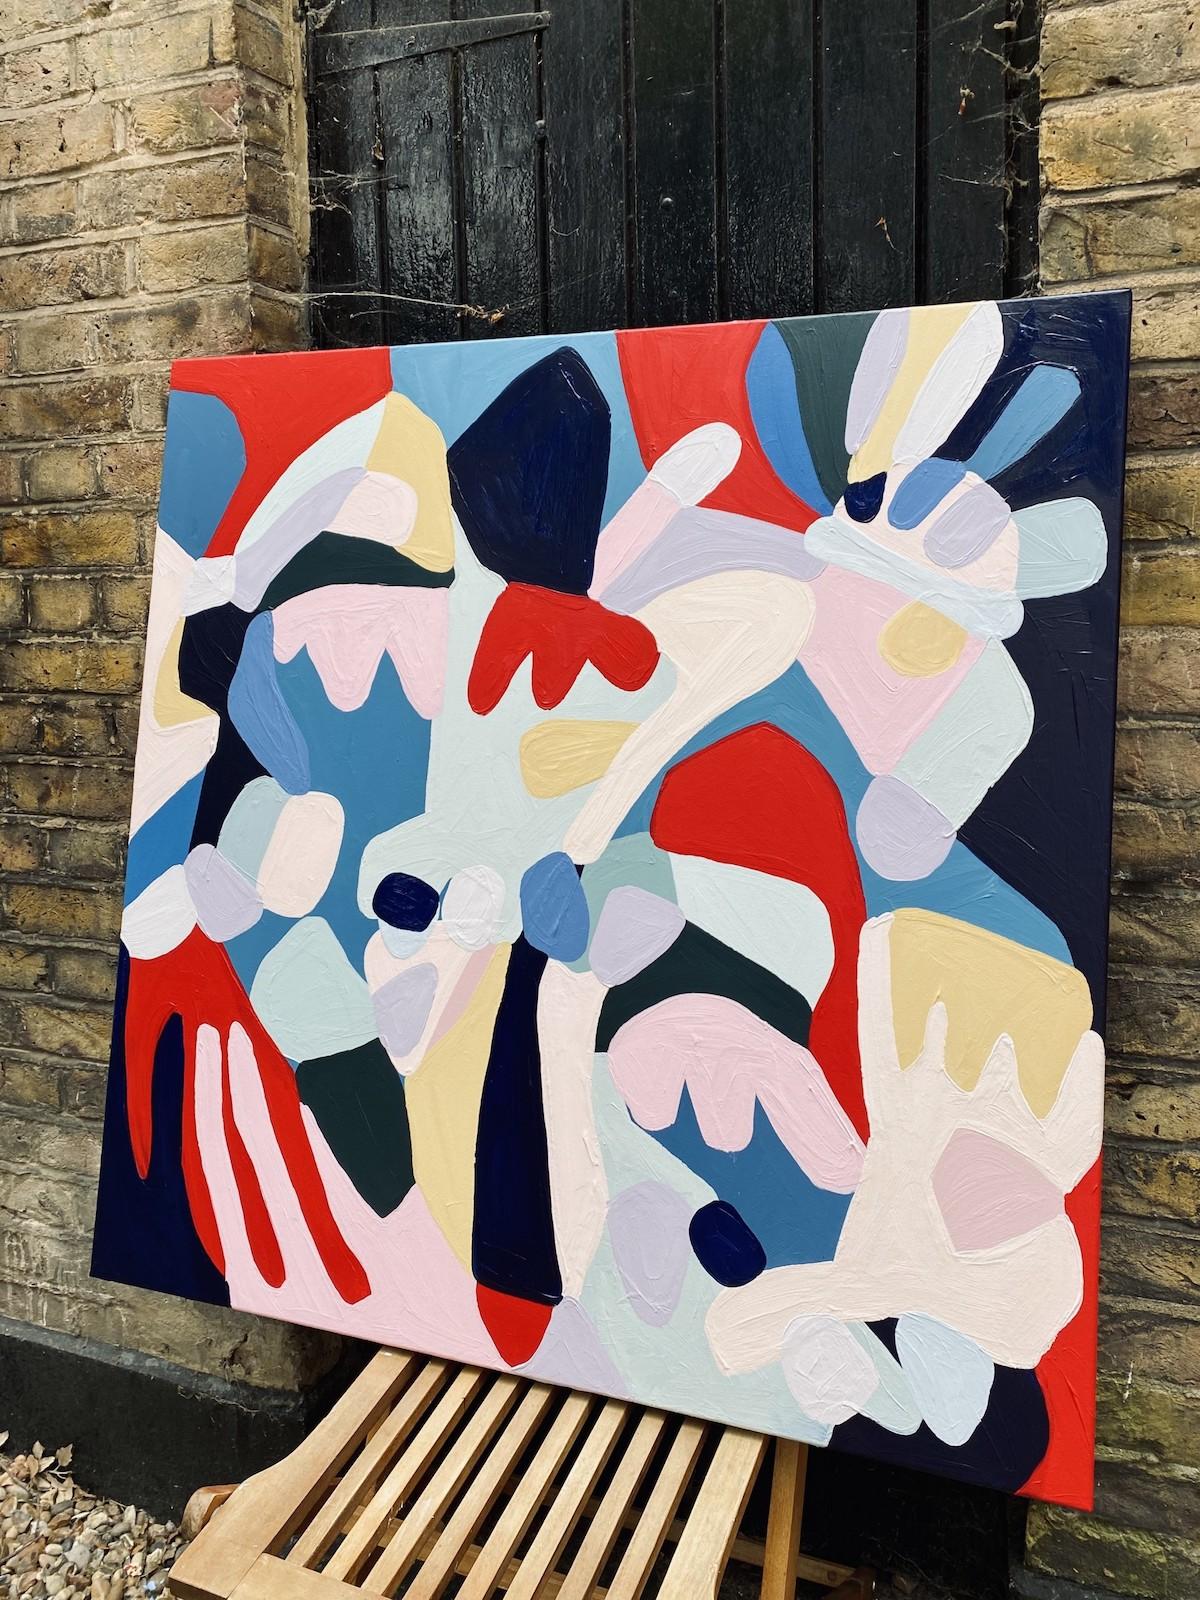 The Bold One by Harriet Chomley [2022]
original and hand signed by the artist 
Acrylic on canvas
Image size: H:100 cm x W:100 cm
Complete Size of Unframed Work: H:100 cm x W:100 cm x D:3.8cm
Sold Unframed
Please note that insitu images are purely an